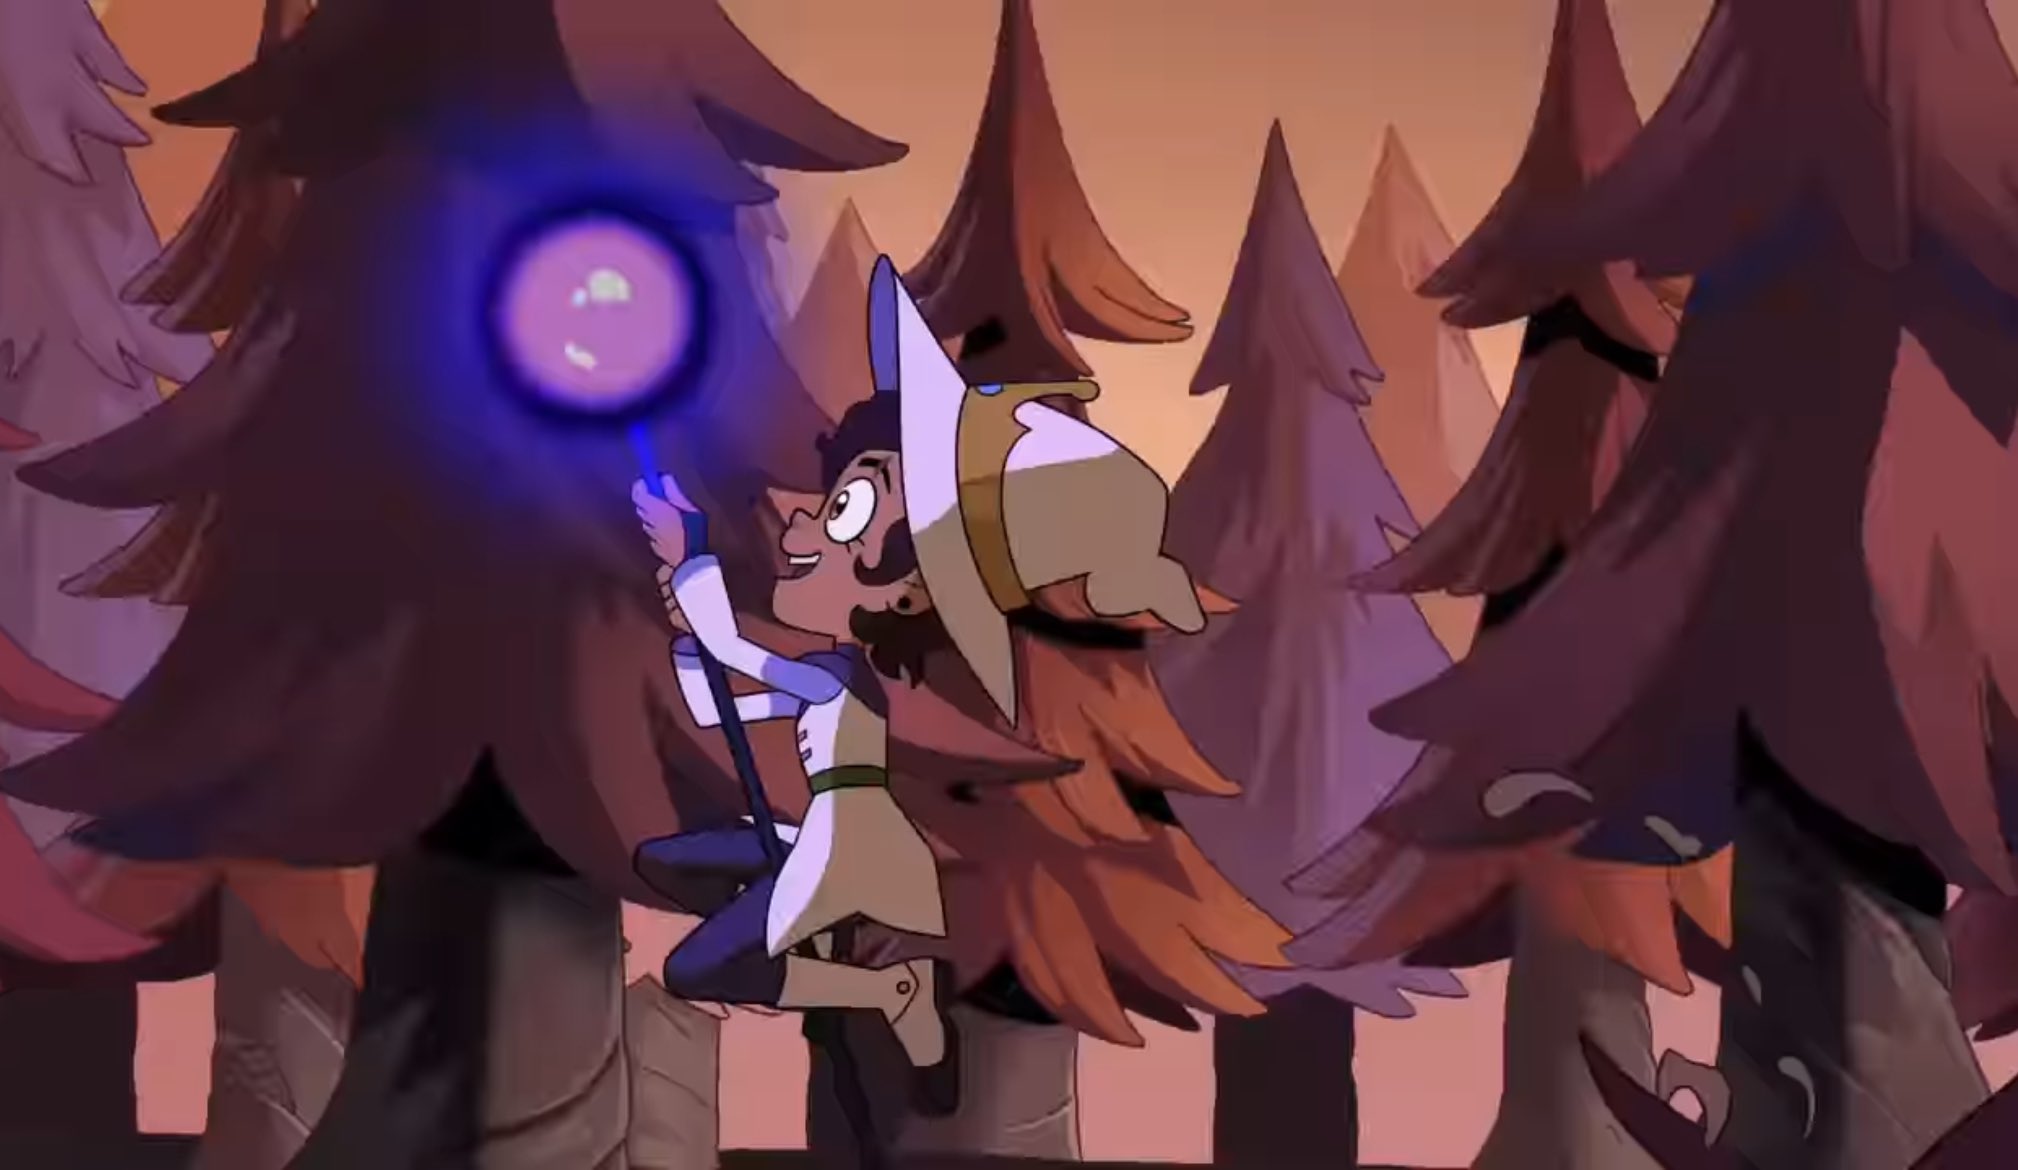 Anneboonchuy on X: The owl house - season 3 ep 2 - for the future  #TheOwlHouse  / X